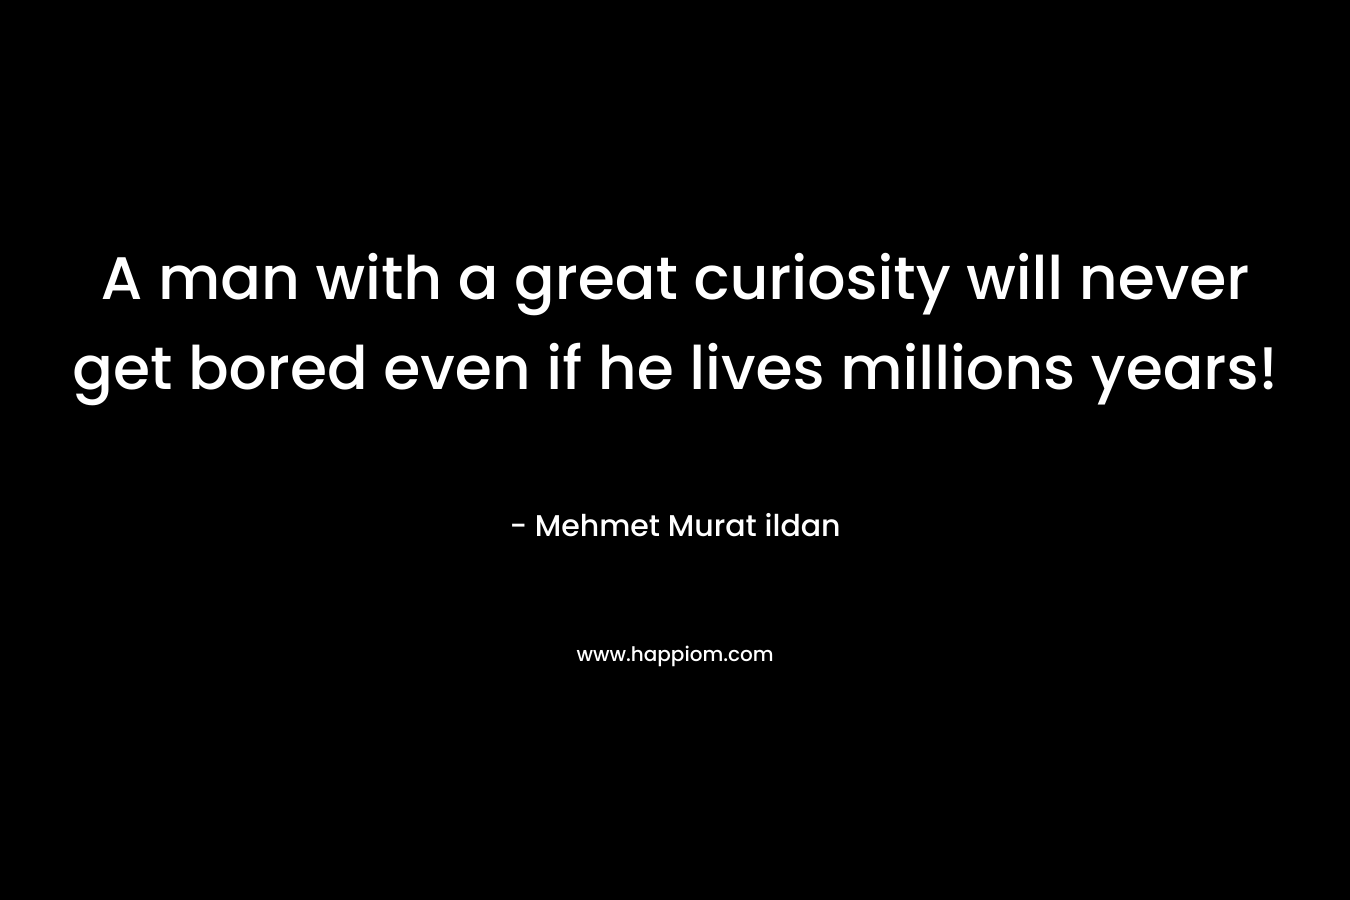 A man with a great curiosity will never get bored even if he lives millions years!